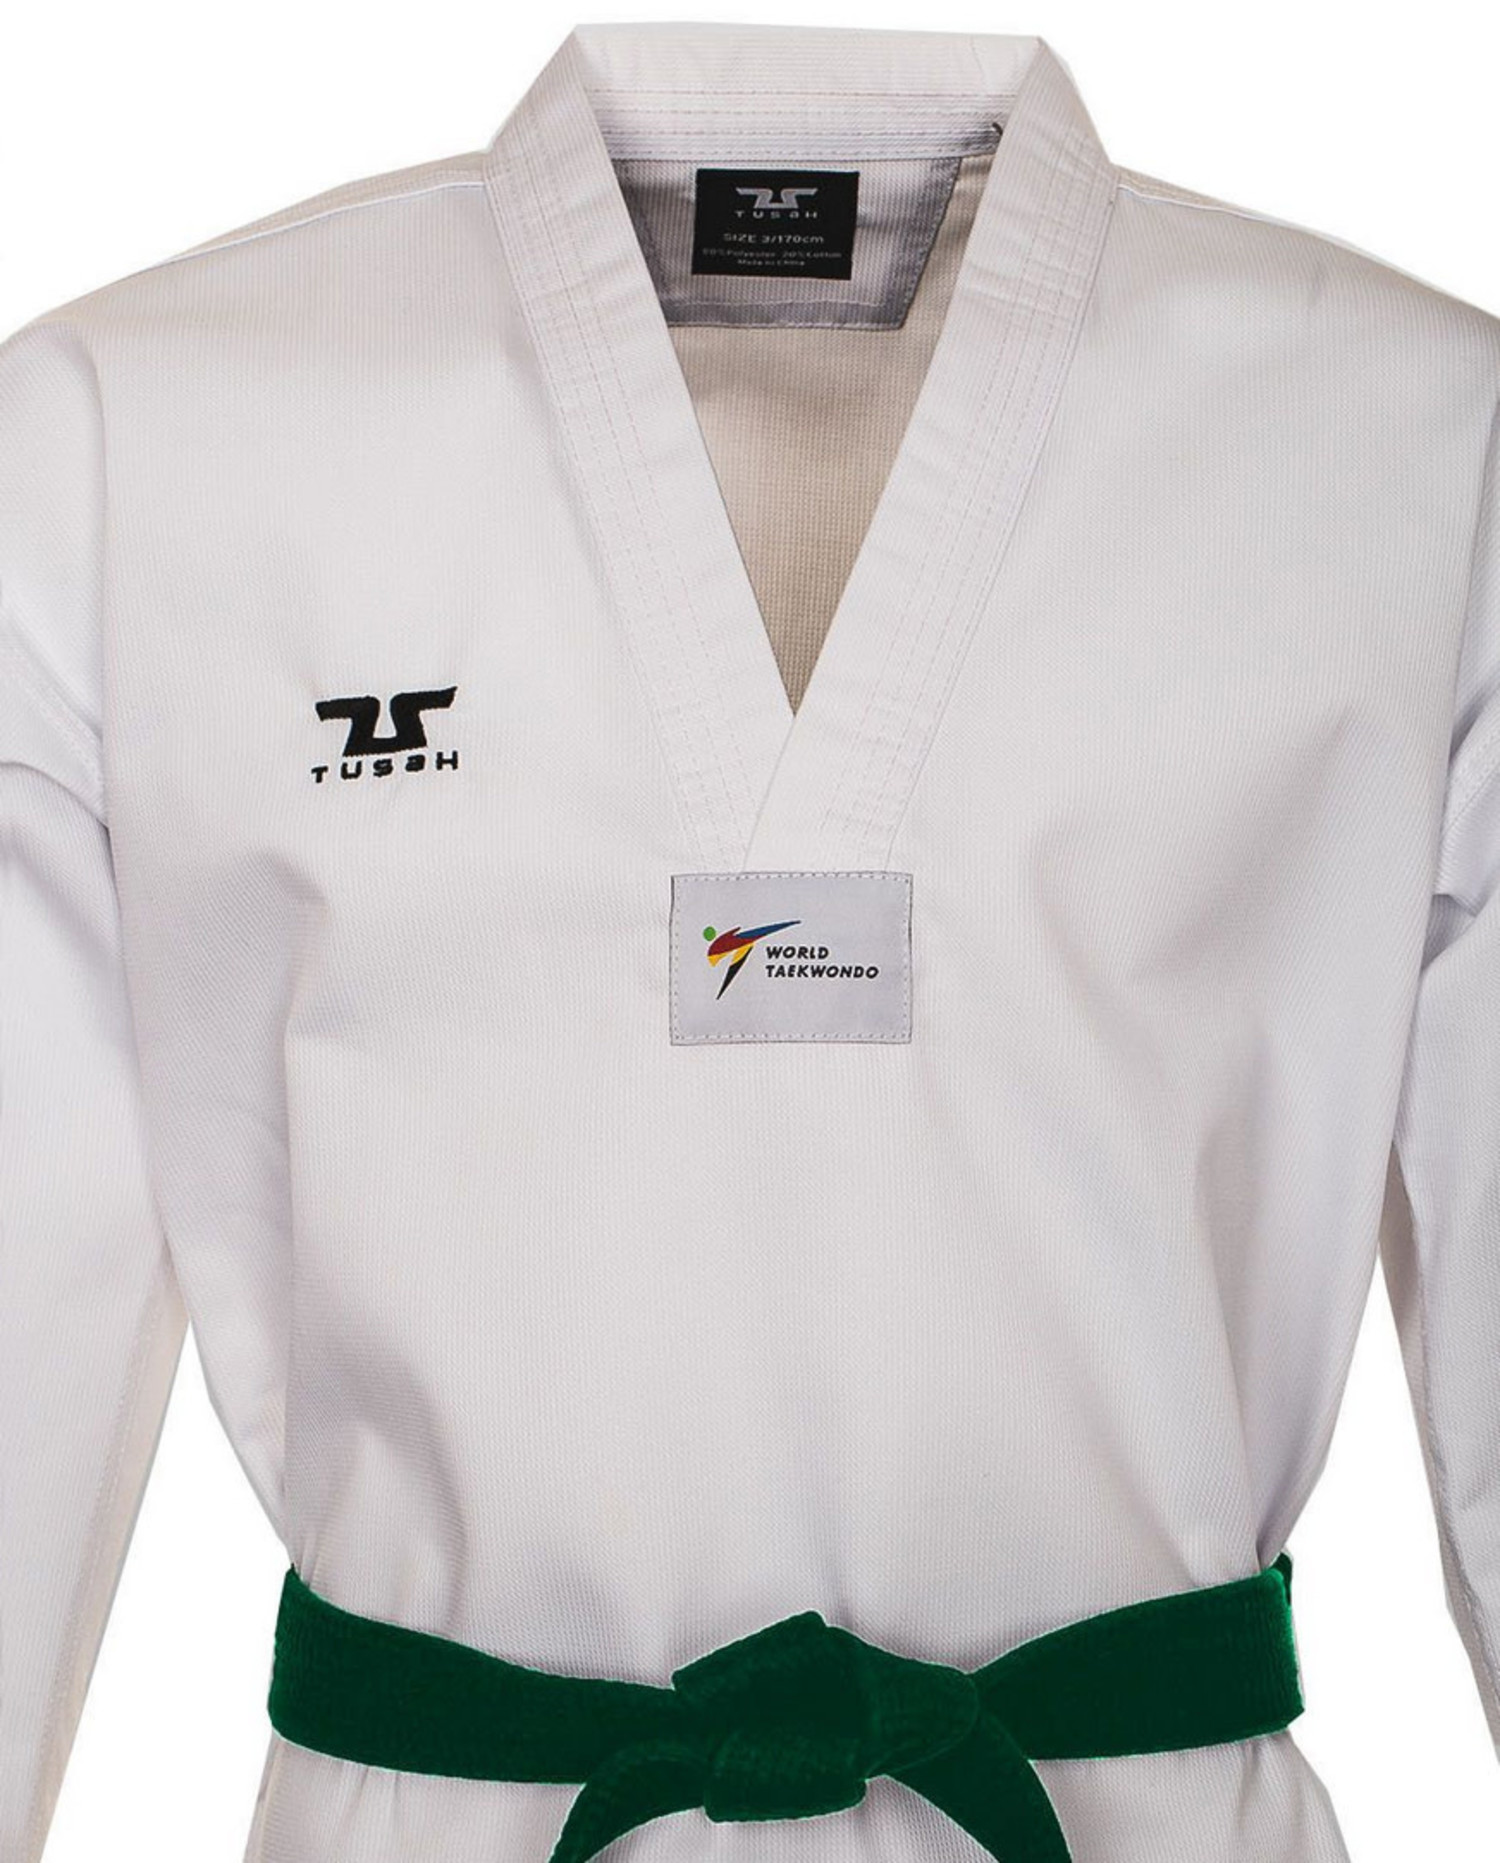 Tusah WT Approved Dobok for all Taekwondo Competitions - Enso Martial Arts  Shop Bristol